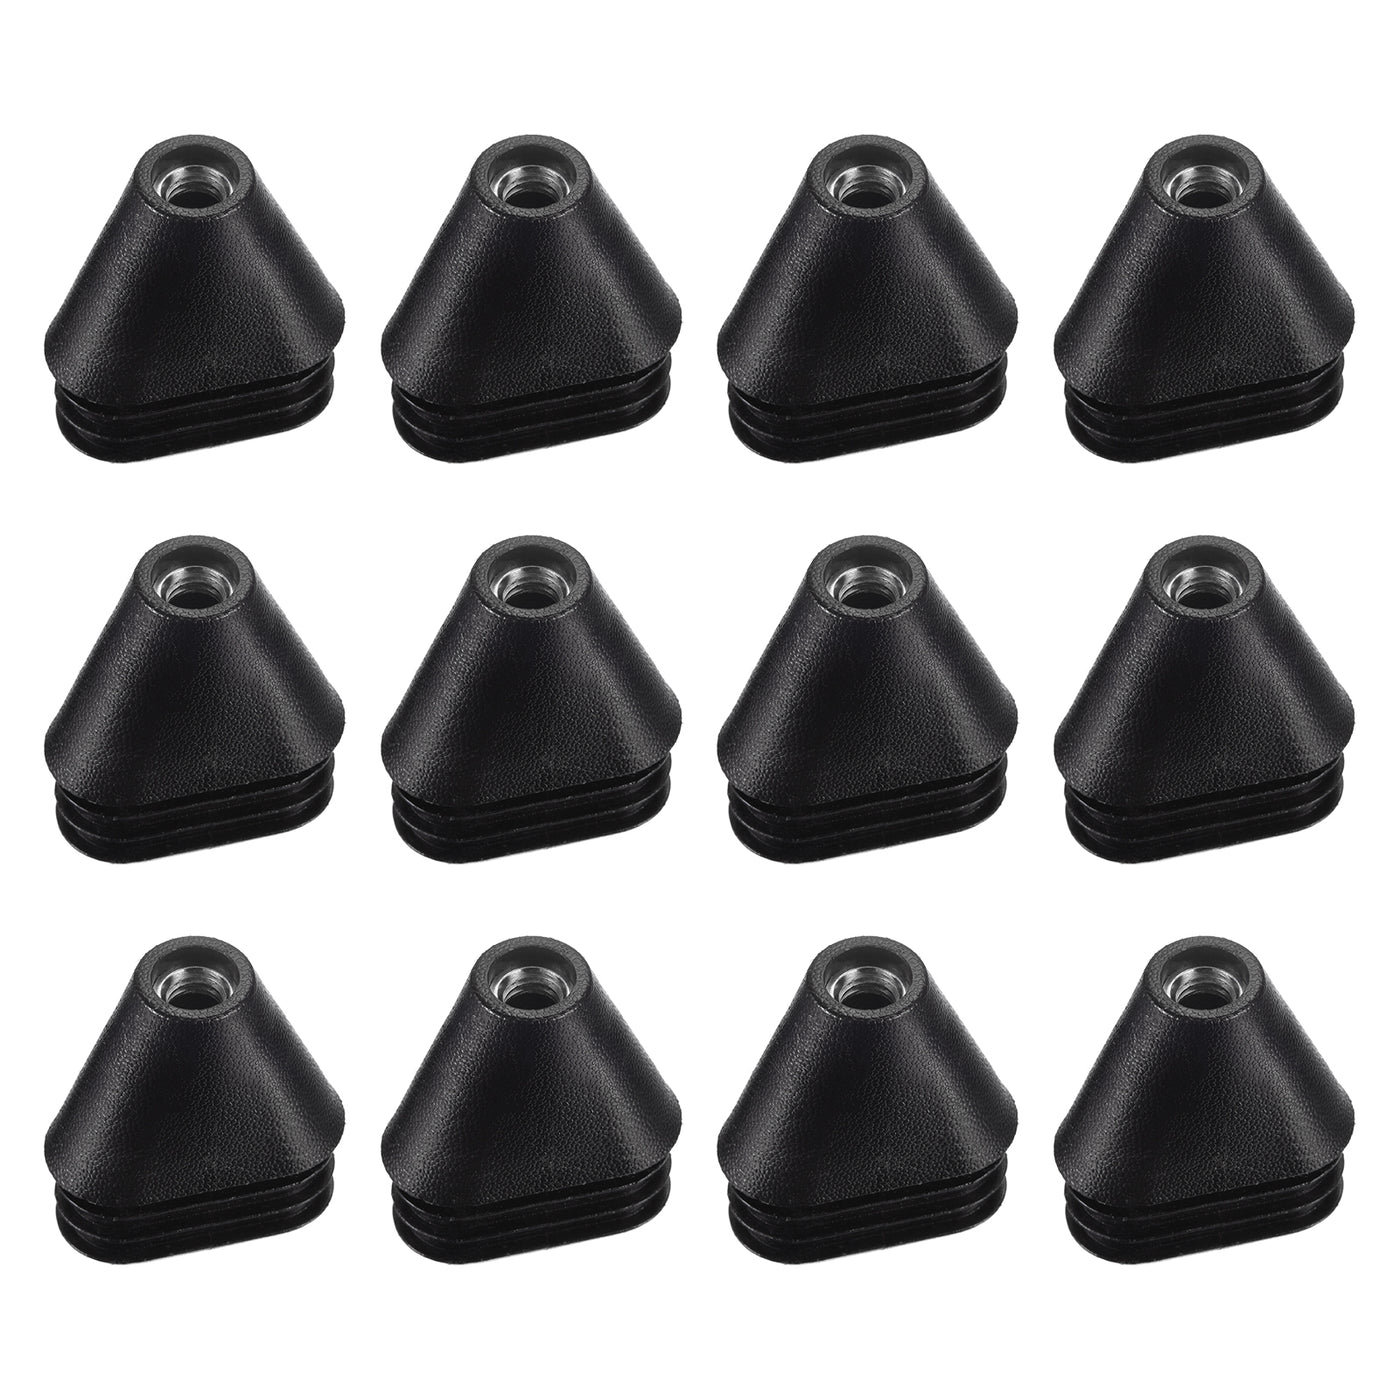 uxcell Uxcell 12Pcs 1.57"x0.79" Caster Insert with Thread, M8 Thread for Furniture